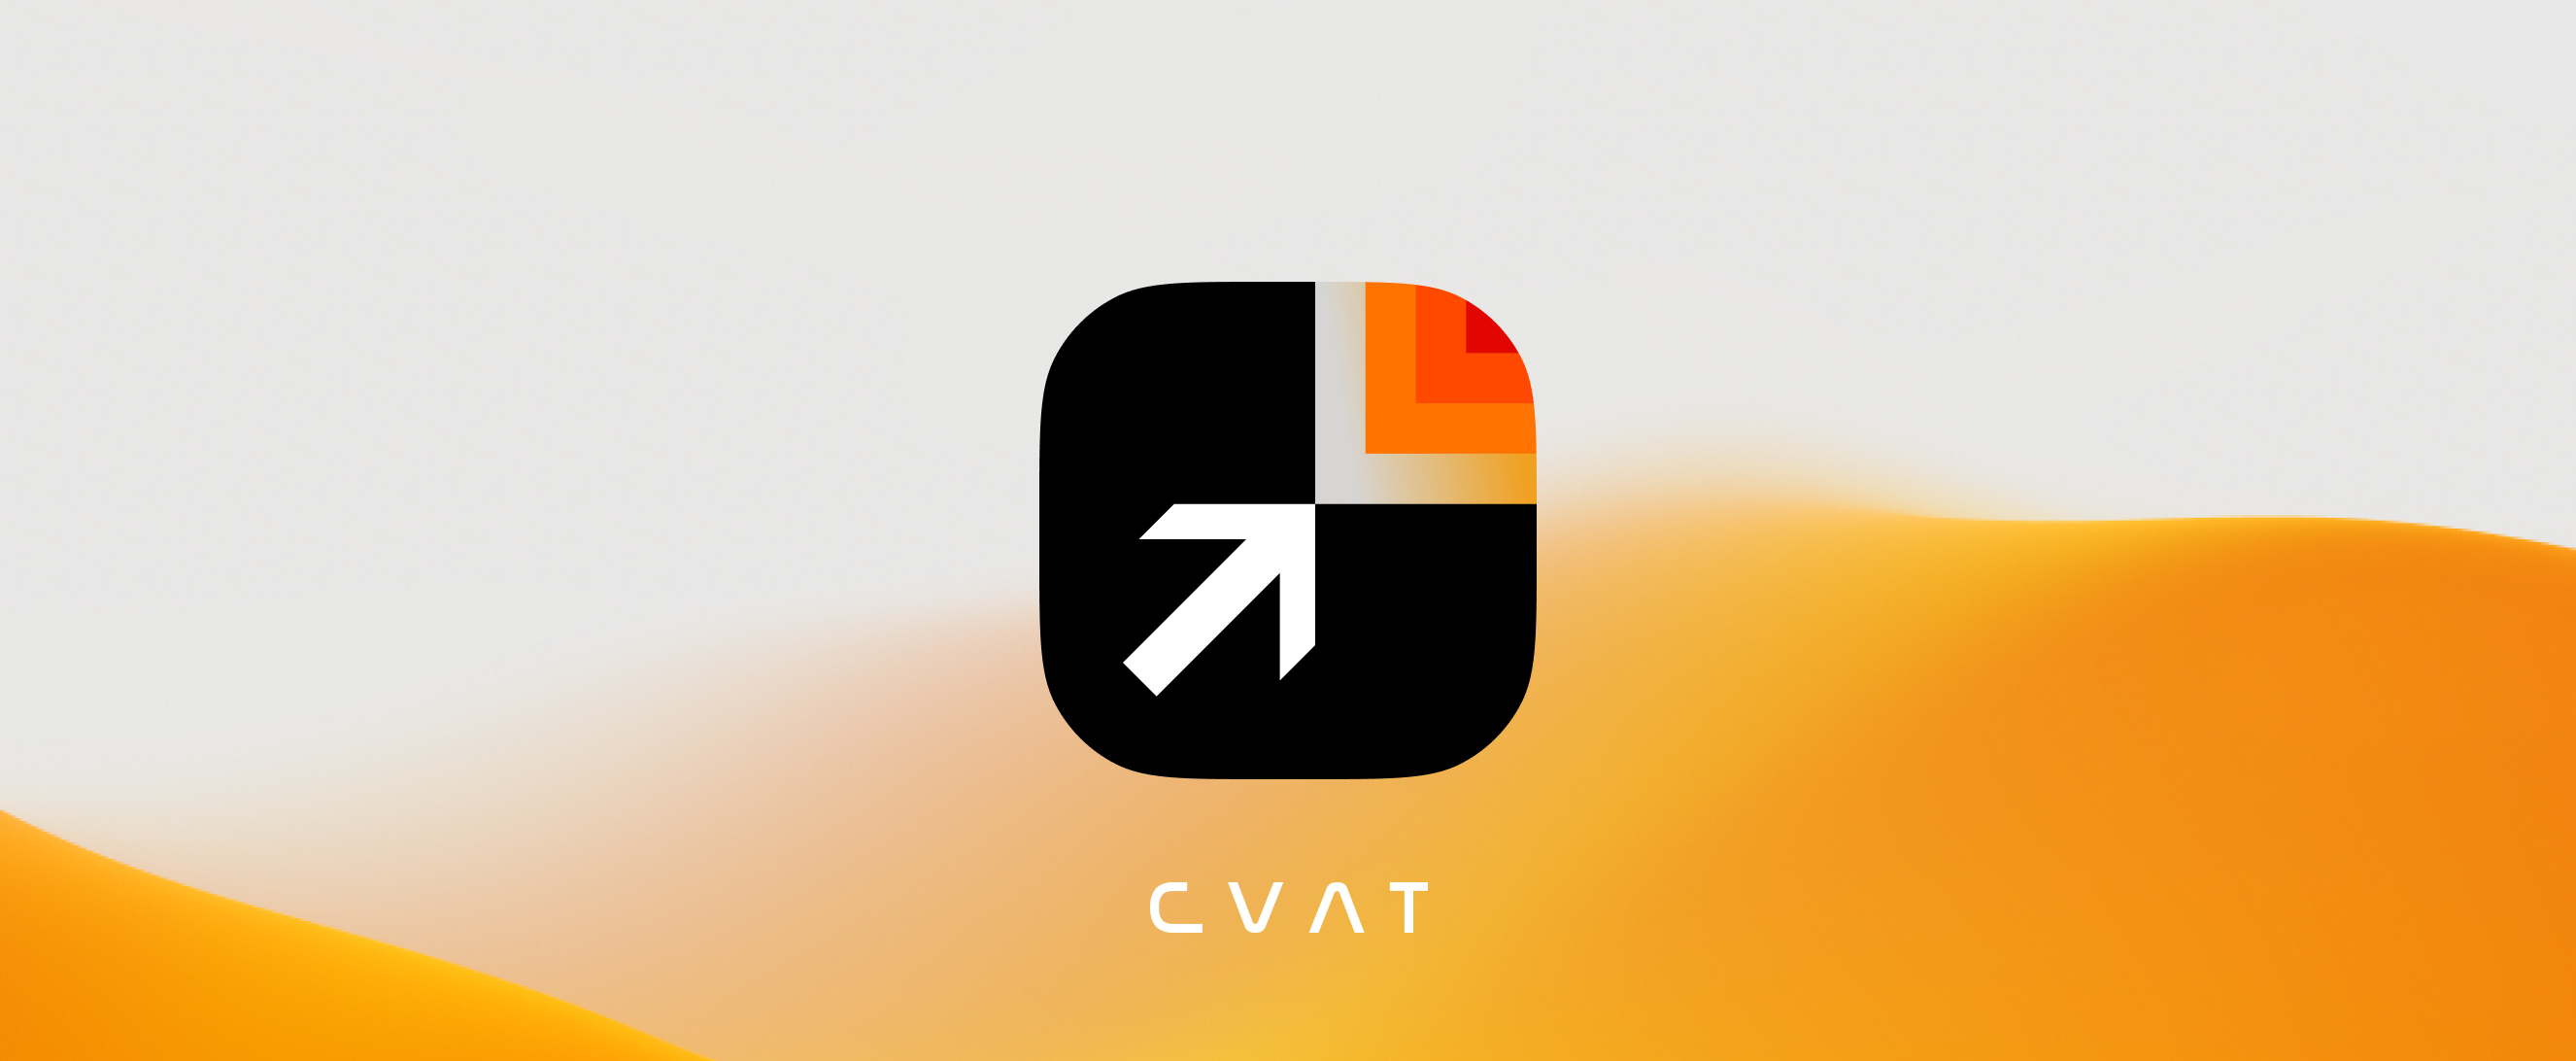 cvat_poster_with_name.png